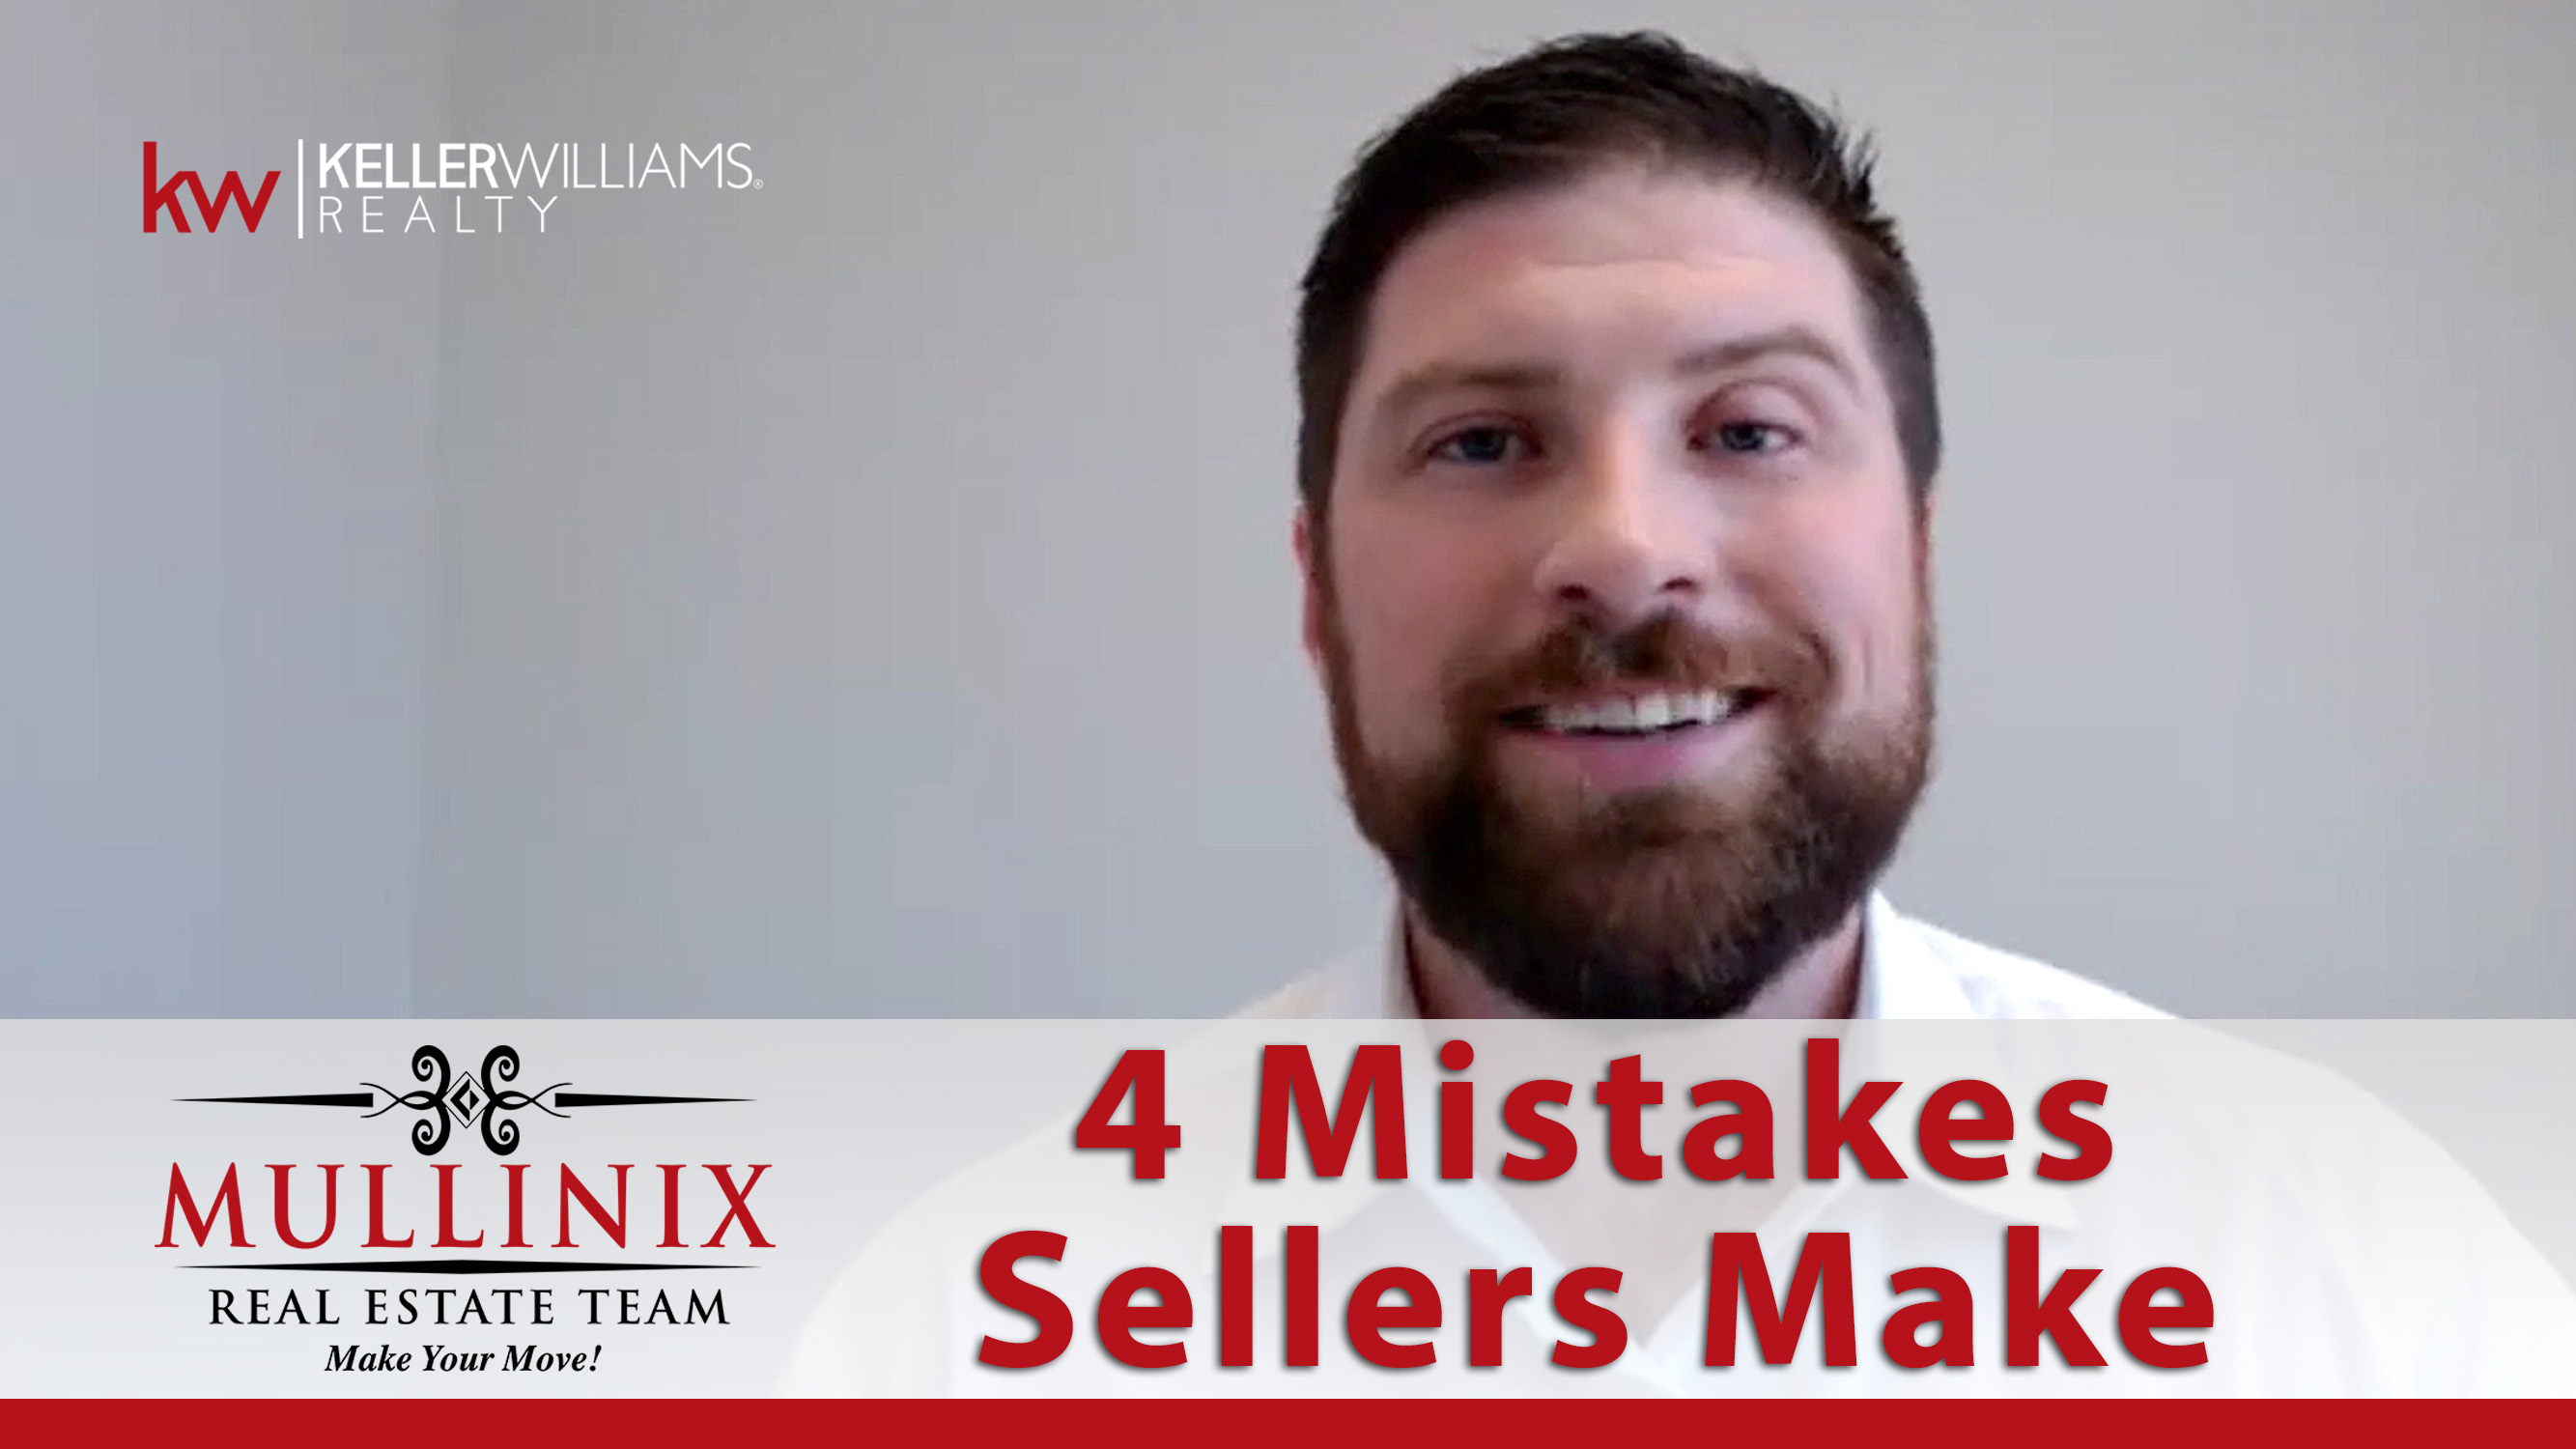 What Are Some Common Home Seller Mistakes?